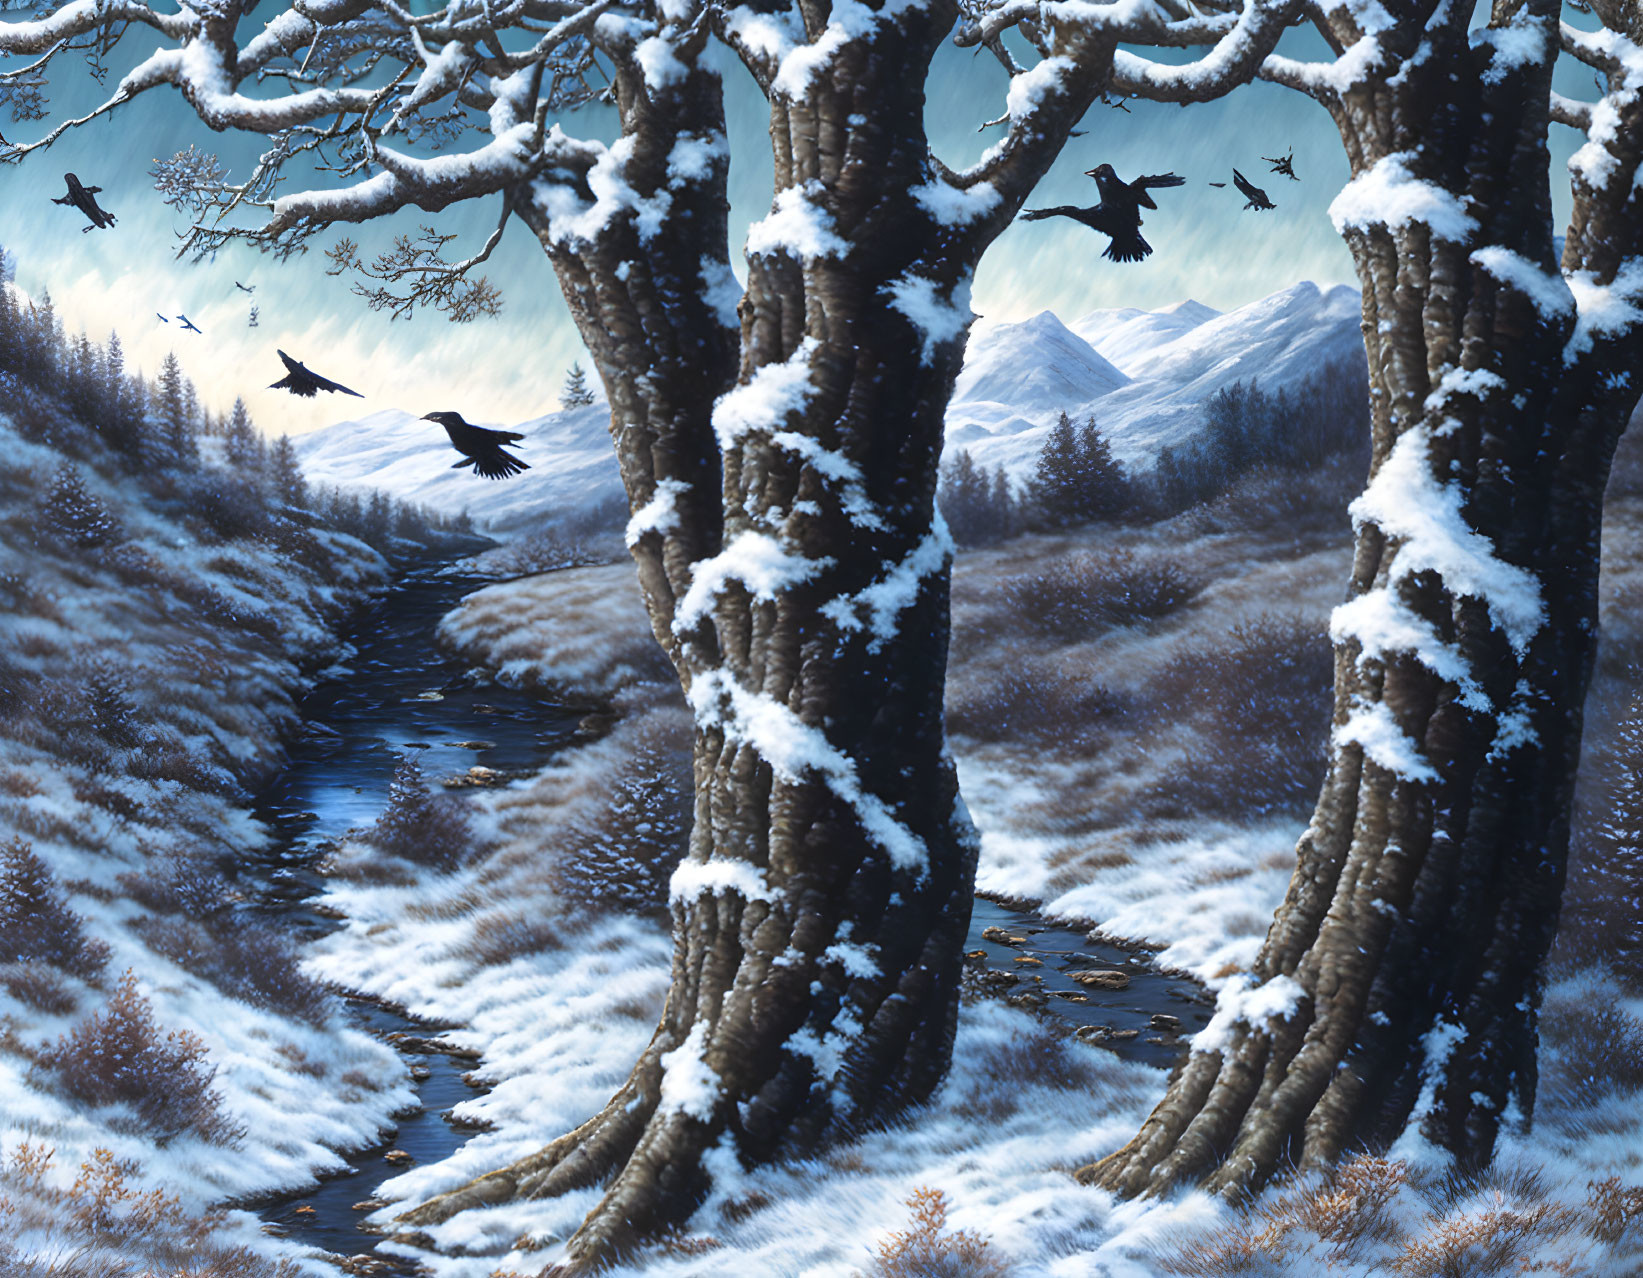 Snow-covered winter landscape with bare trees, flying crows, stream, mountains, and cloudy sky